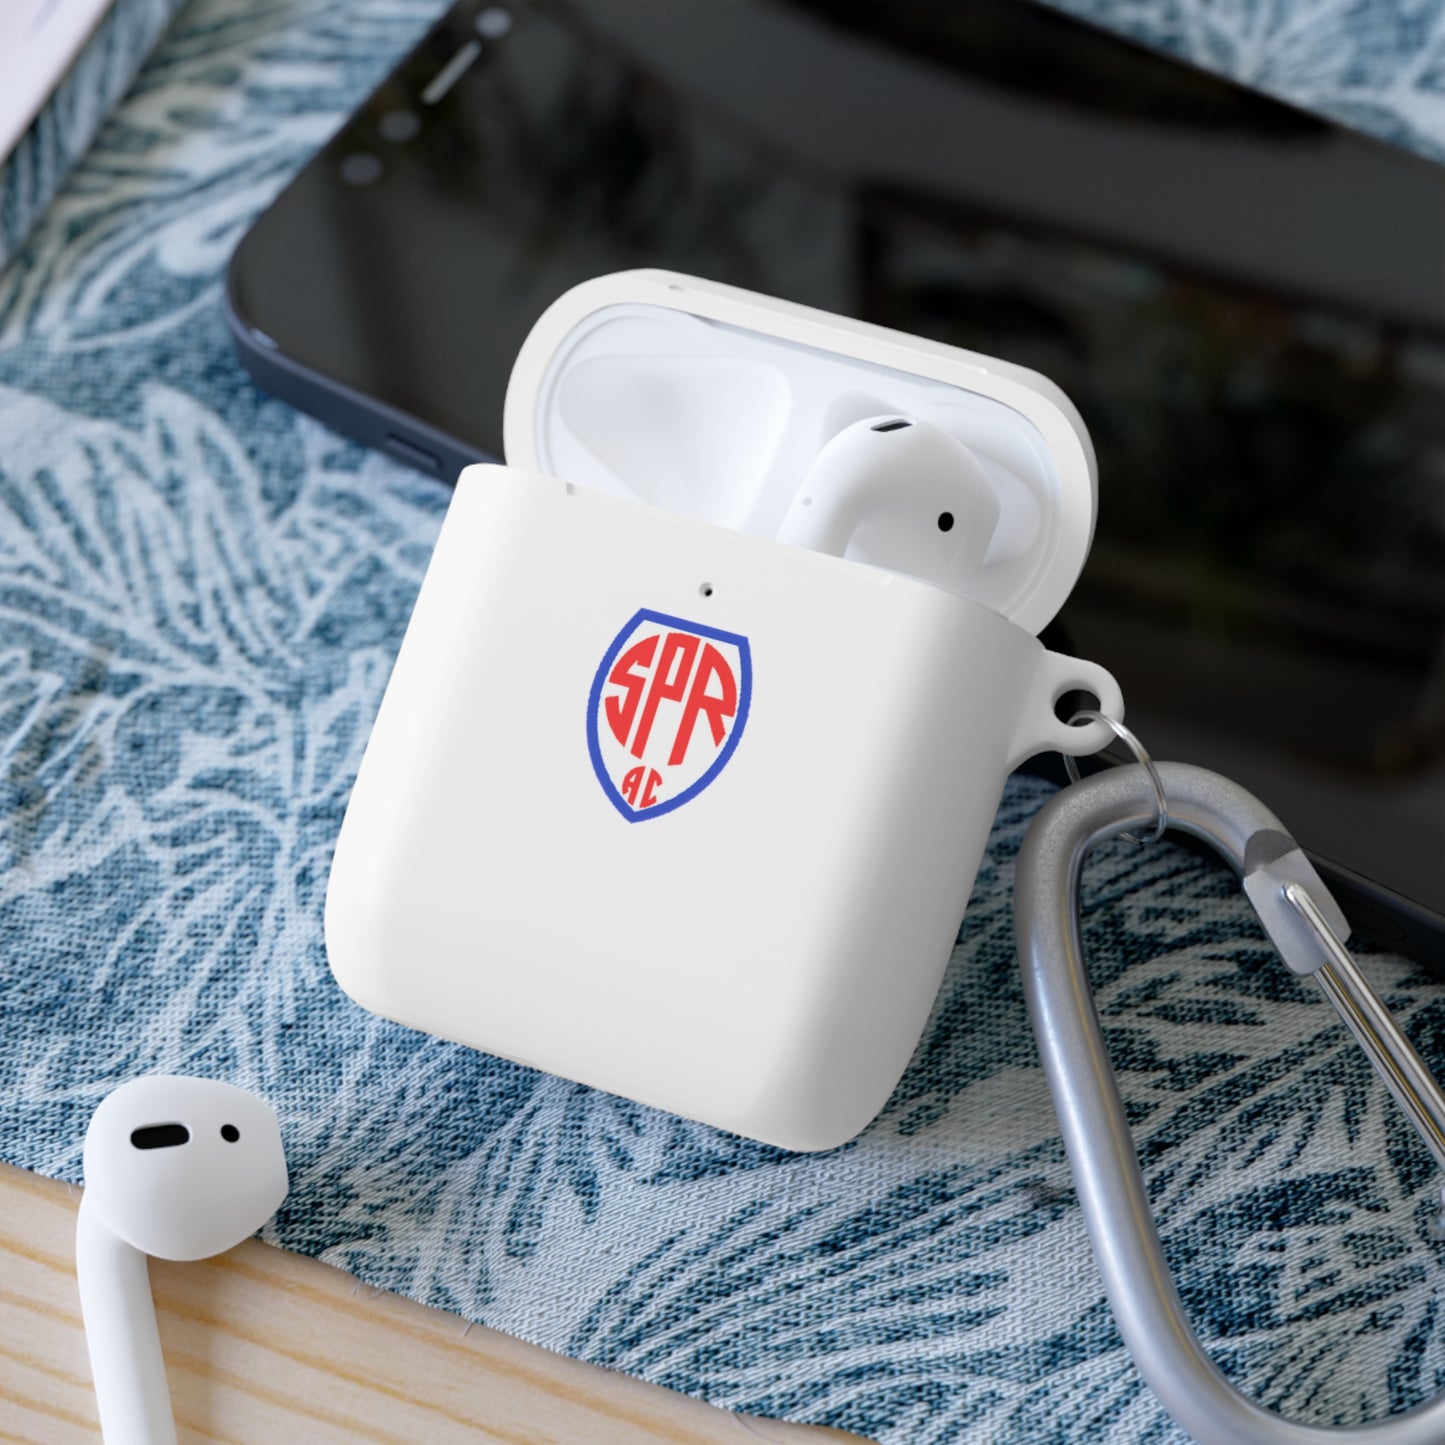 Sao Paulo Railway Athletic Club AirPods and AirPods Pro Case Cover